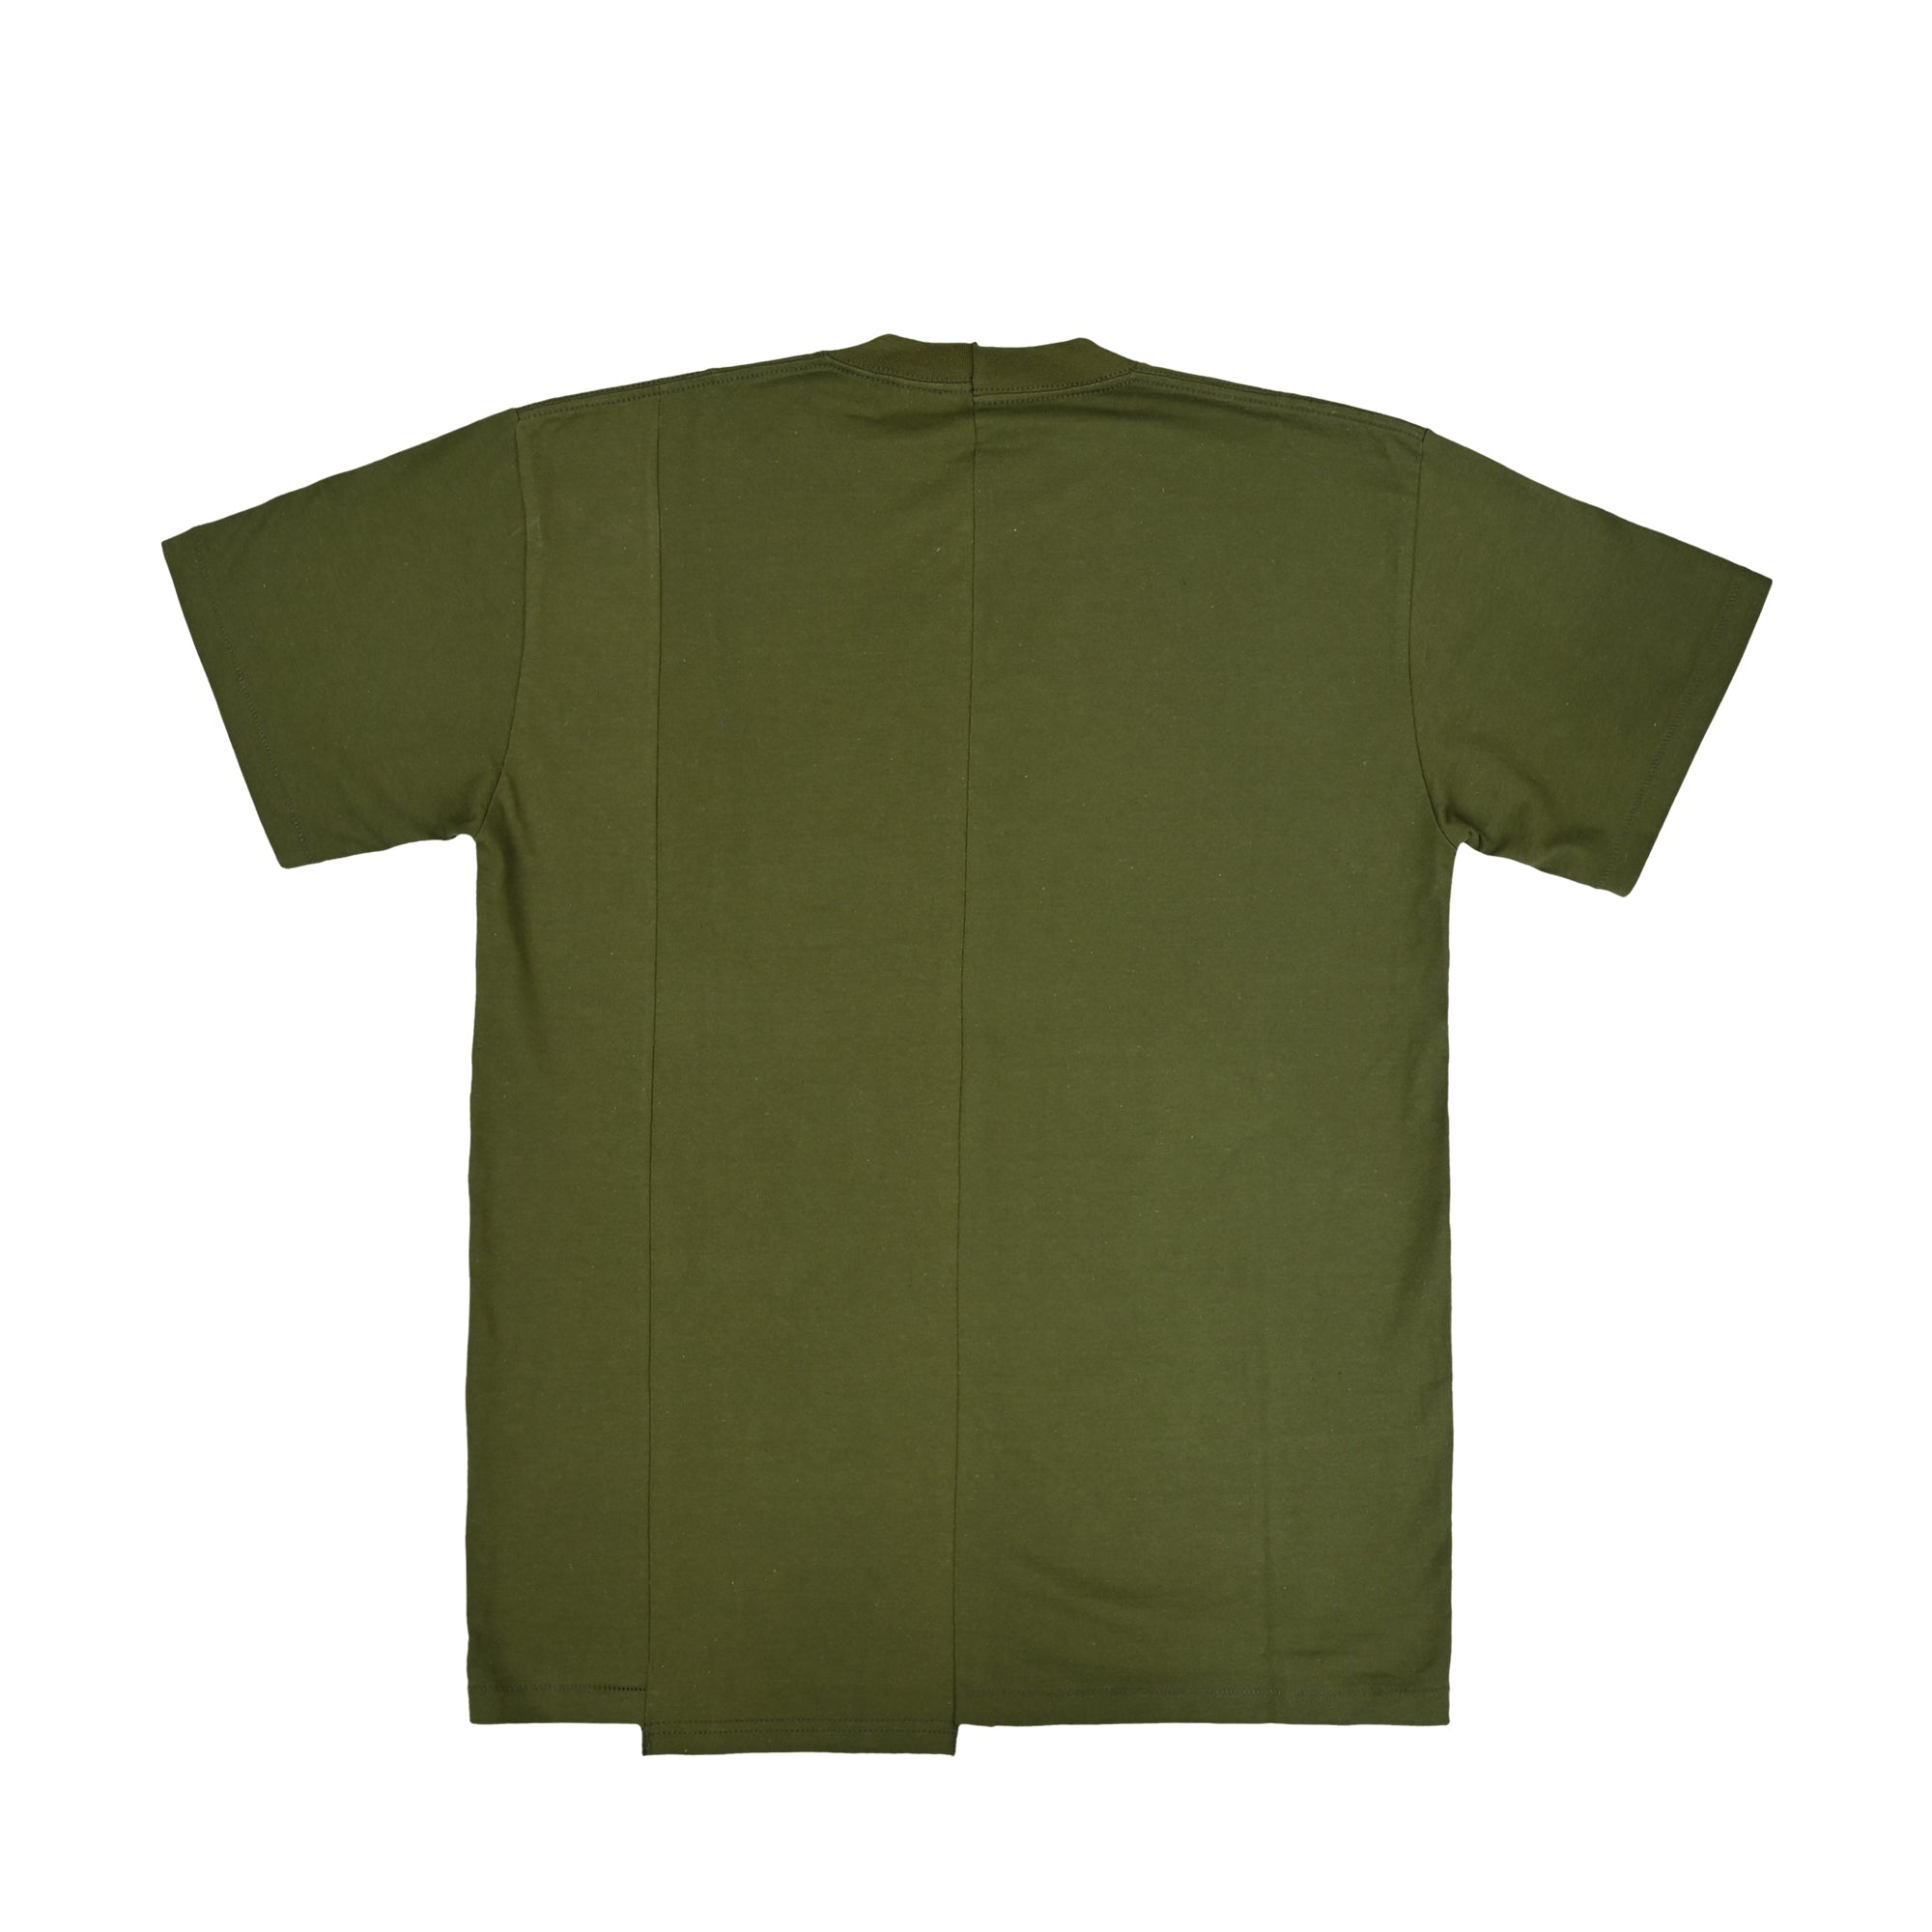 The Salvages 'Sublime' Reconstructed T-shirt in Army Green